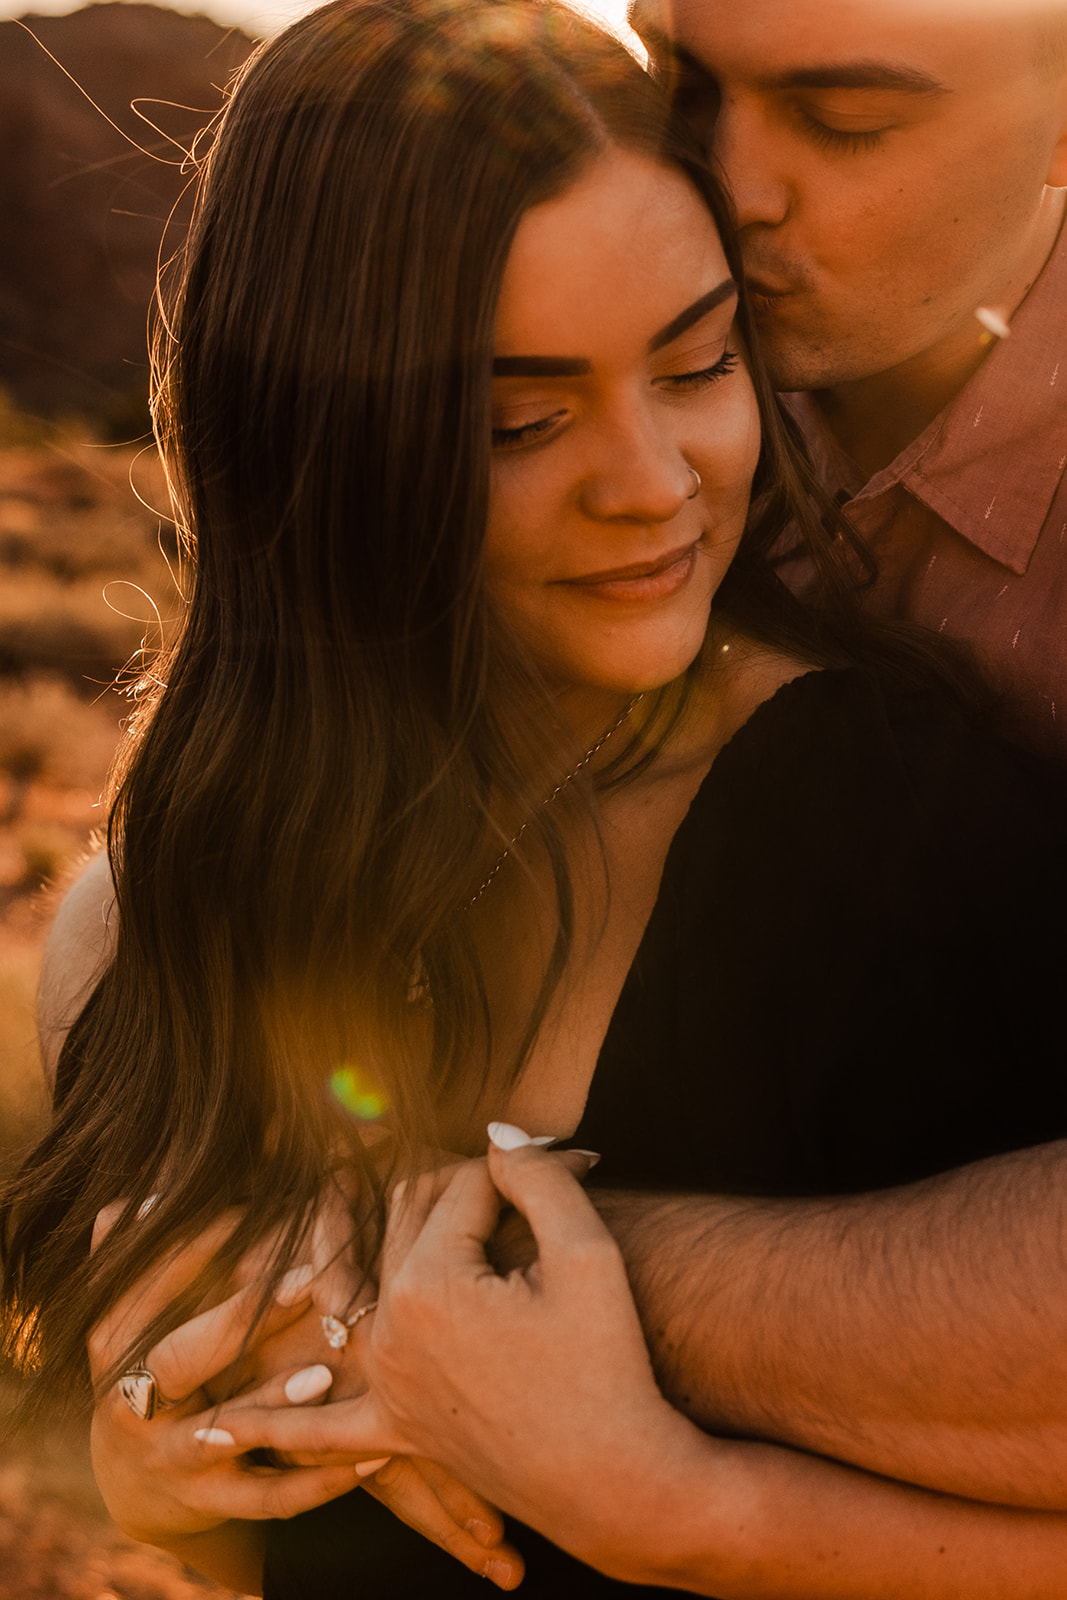 couple at sunset for their engagement portraits